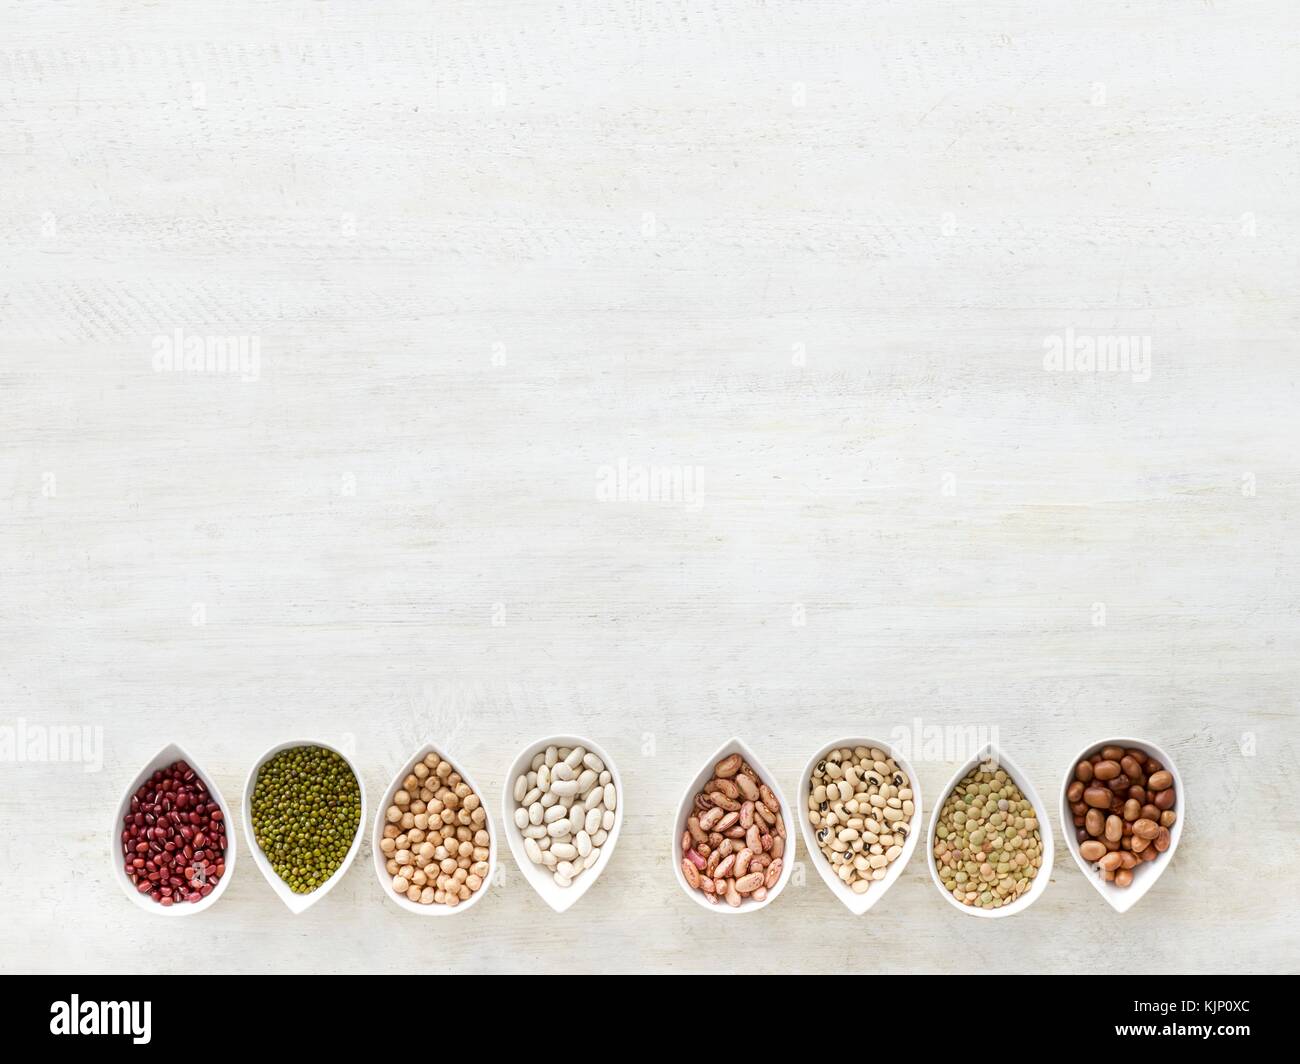 Pulses in tear shaped mini bowls, overhead view. Stock Photo